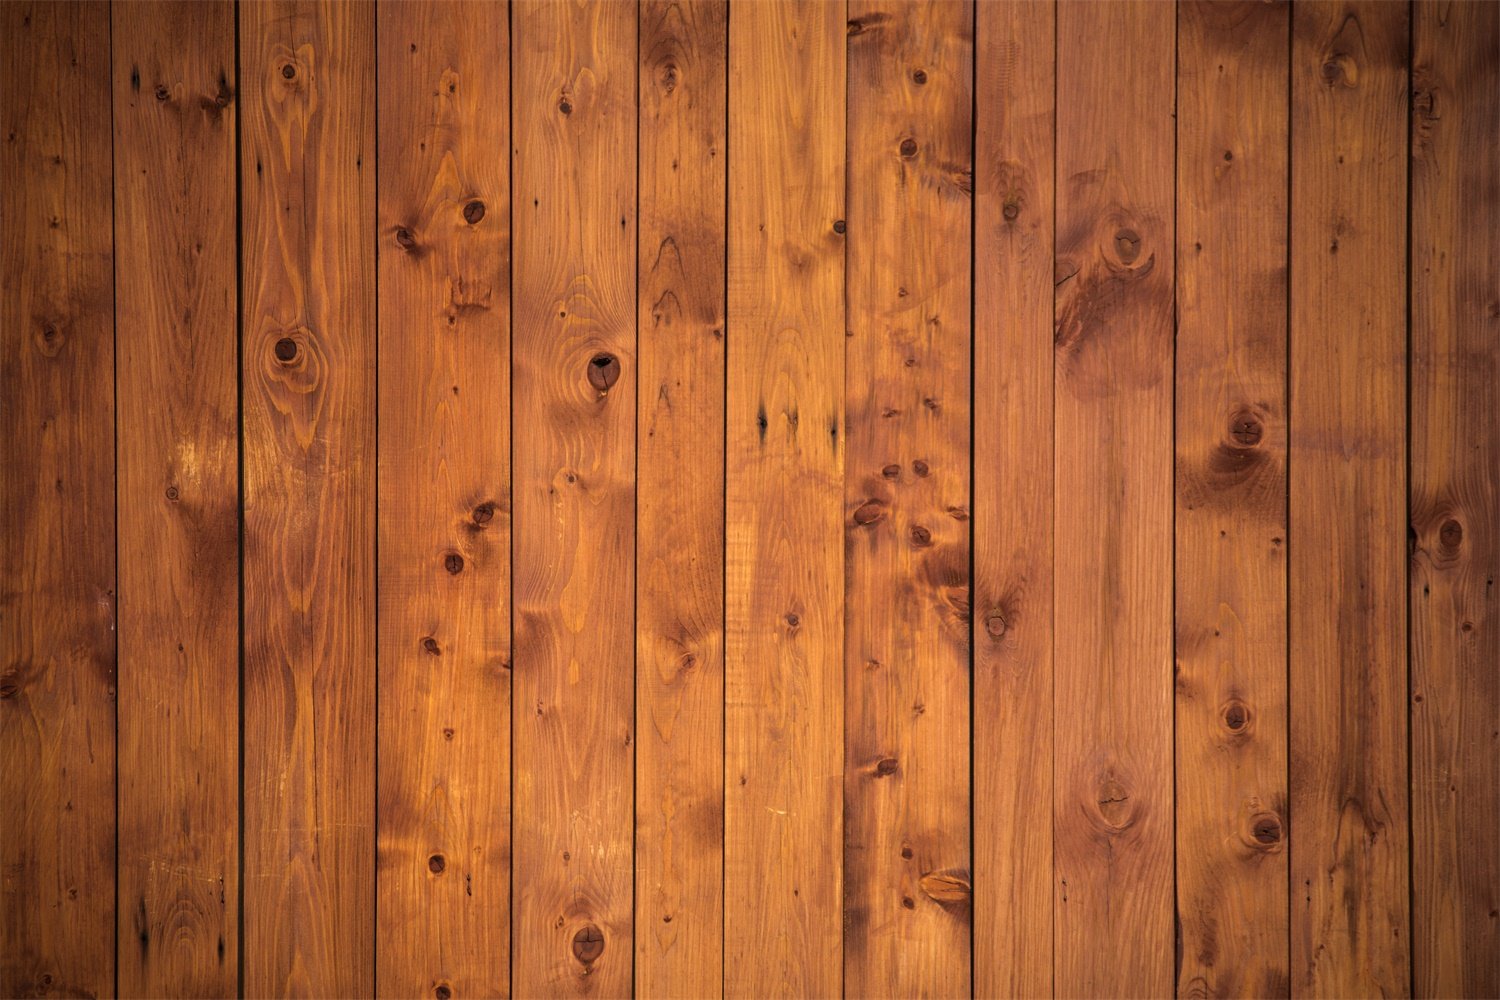 Chiefbackdrop Grunge Brown Wooden Plank Texture Wall Photography Back